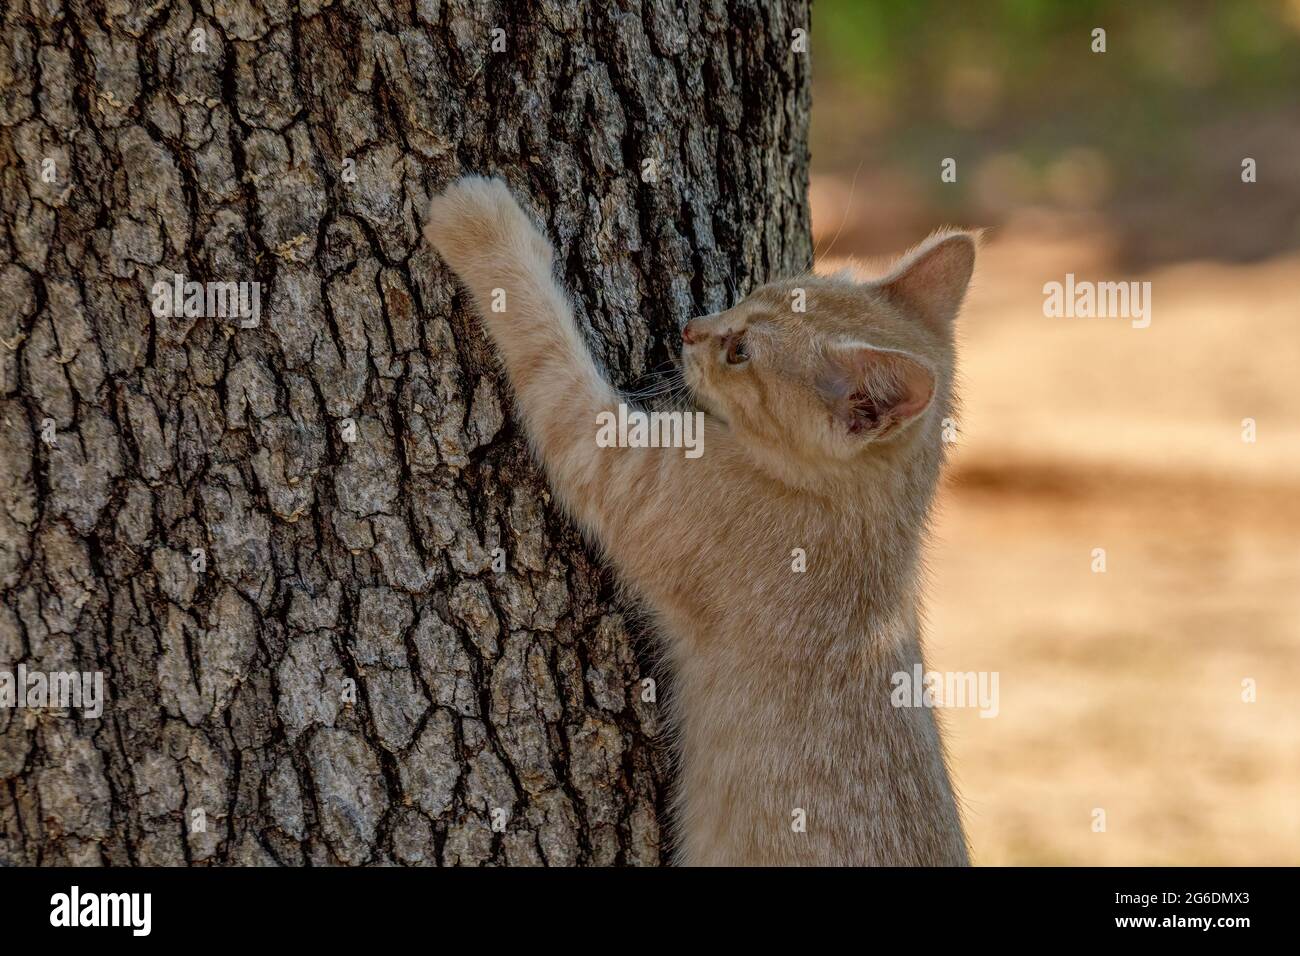 Litte kittens playing and learning to hunt. Stock Photo